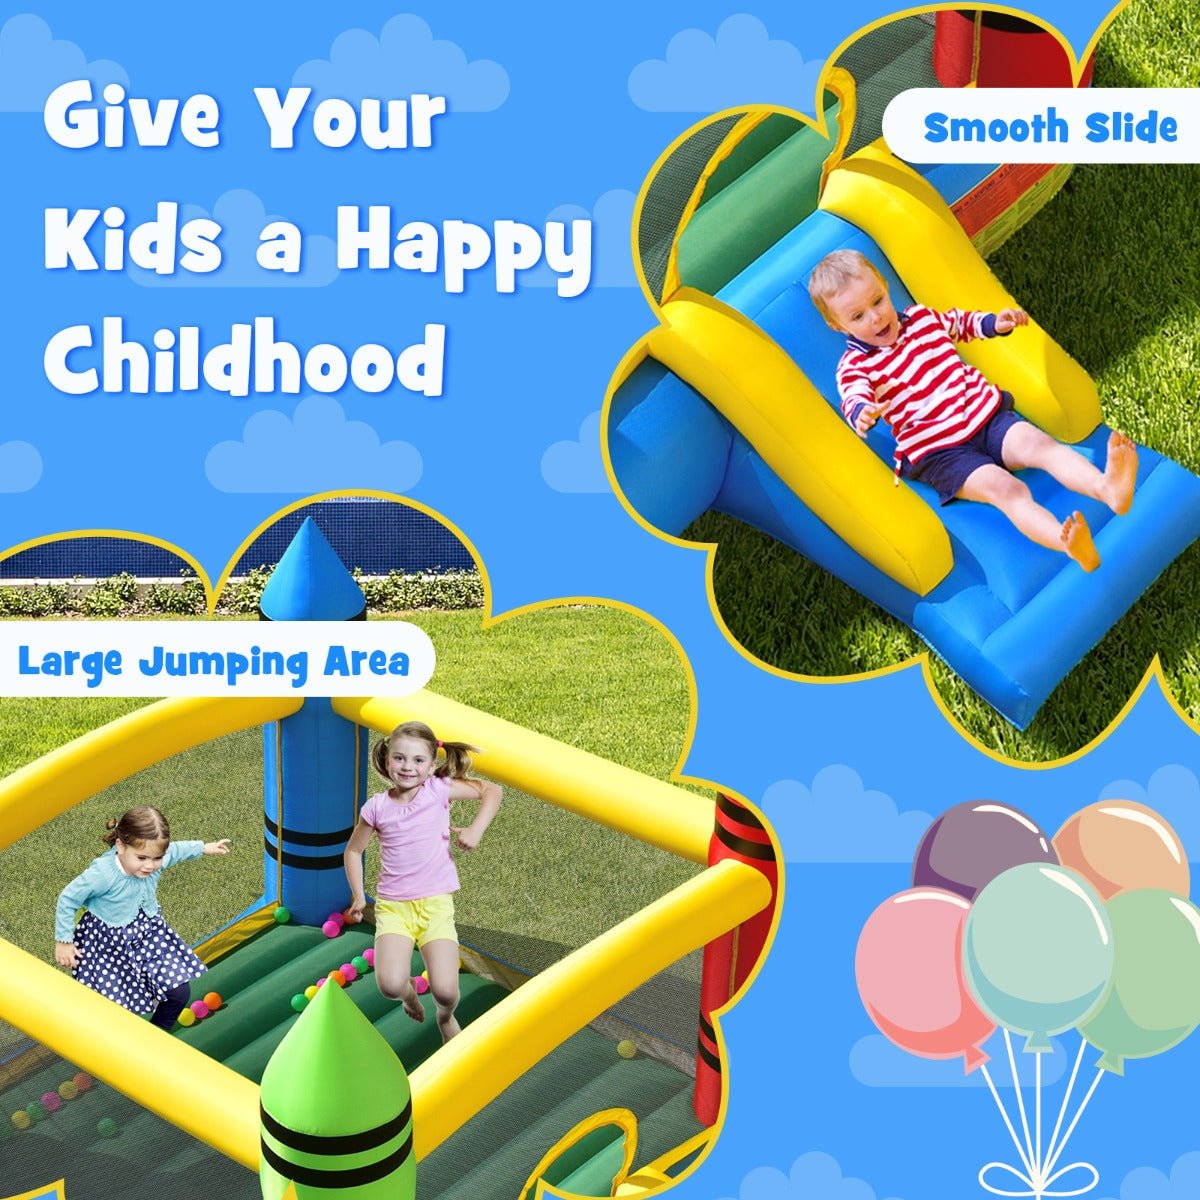 Kids Active Playground: Inflatable Bounce House with Slide for Fun